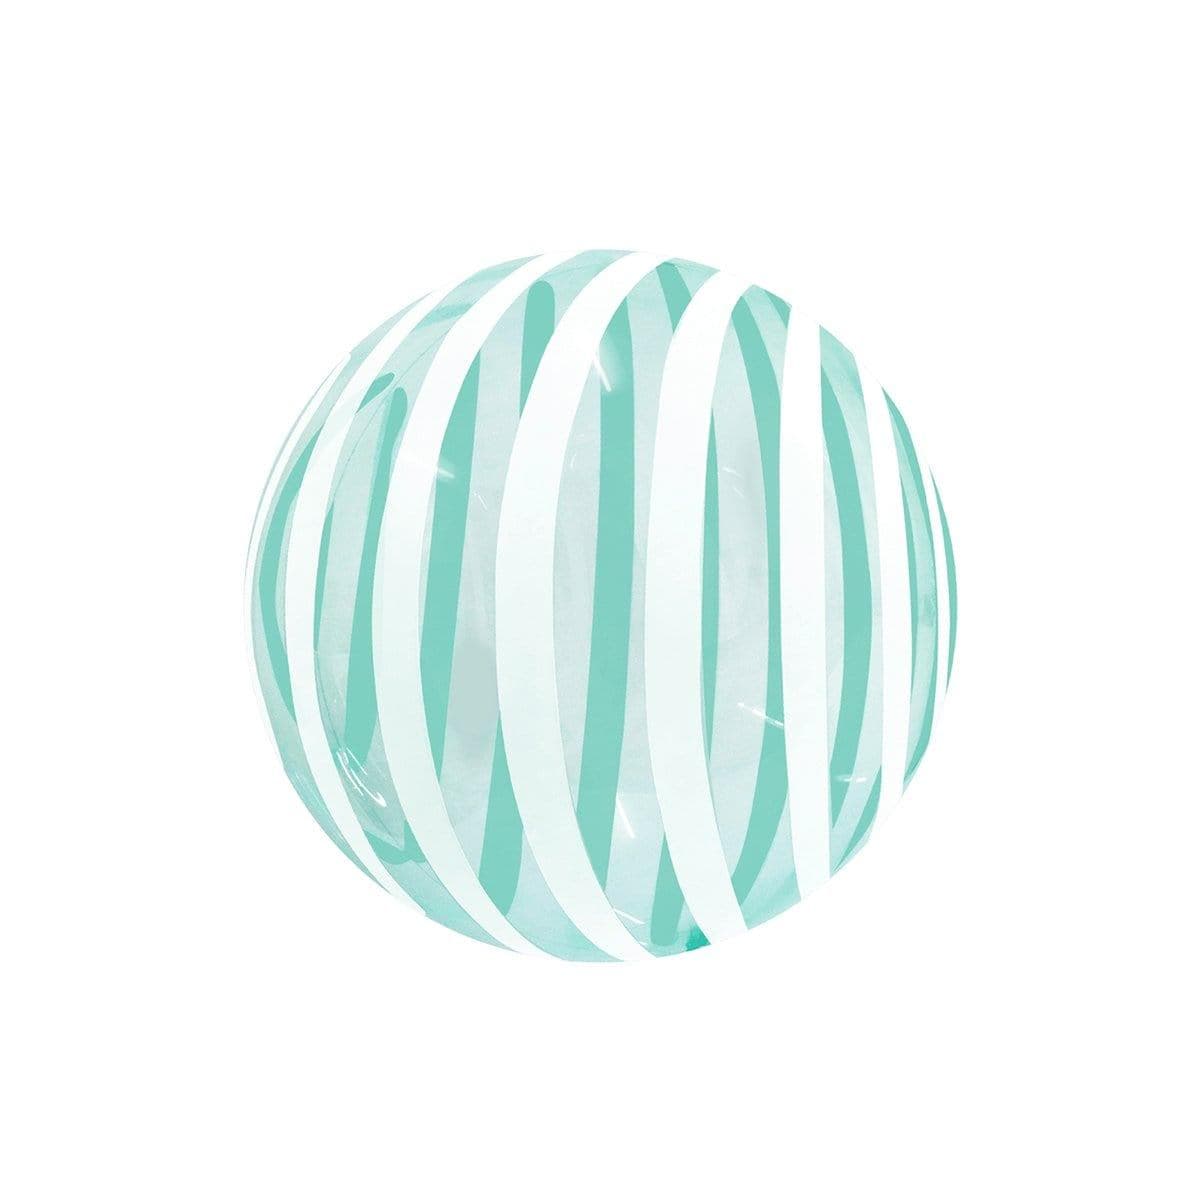 Buy Balloons Stripe Bubble Balloon, Green & White, 18 Inches sold at Party Expert